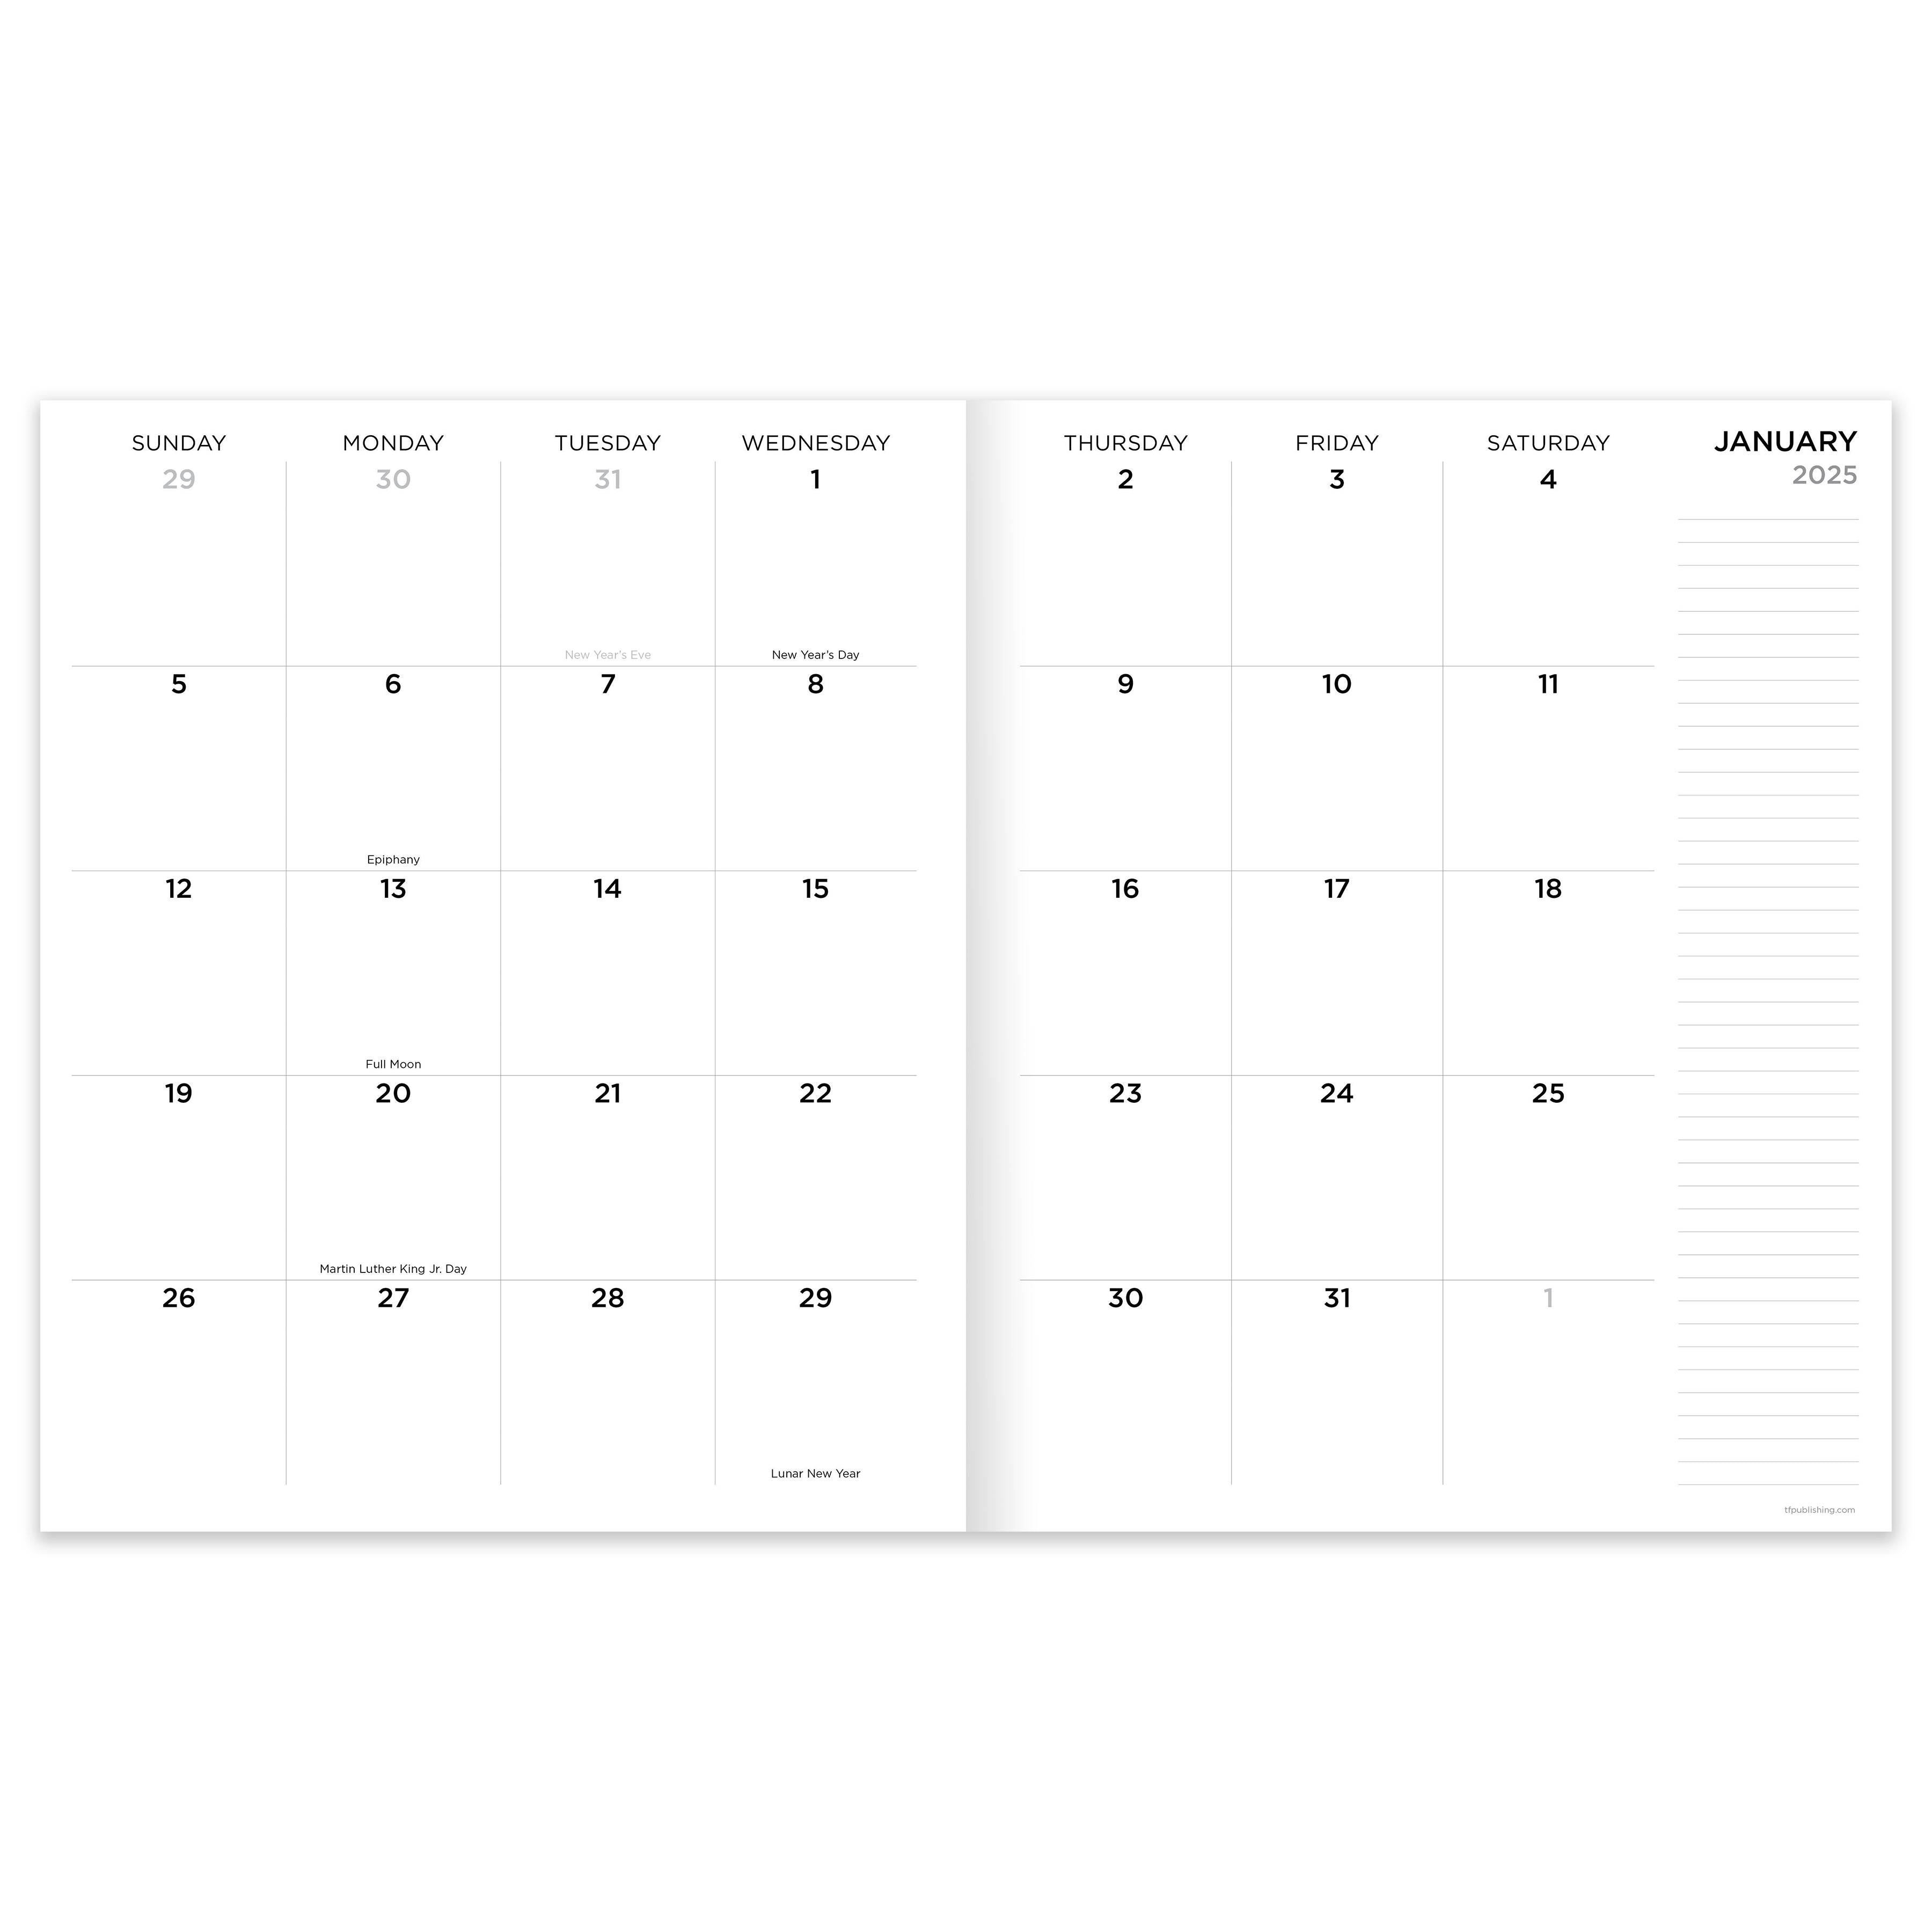 2025 Impressed Flowers - Large Monthly Diary/Planner